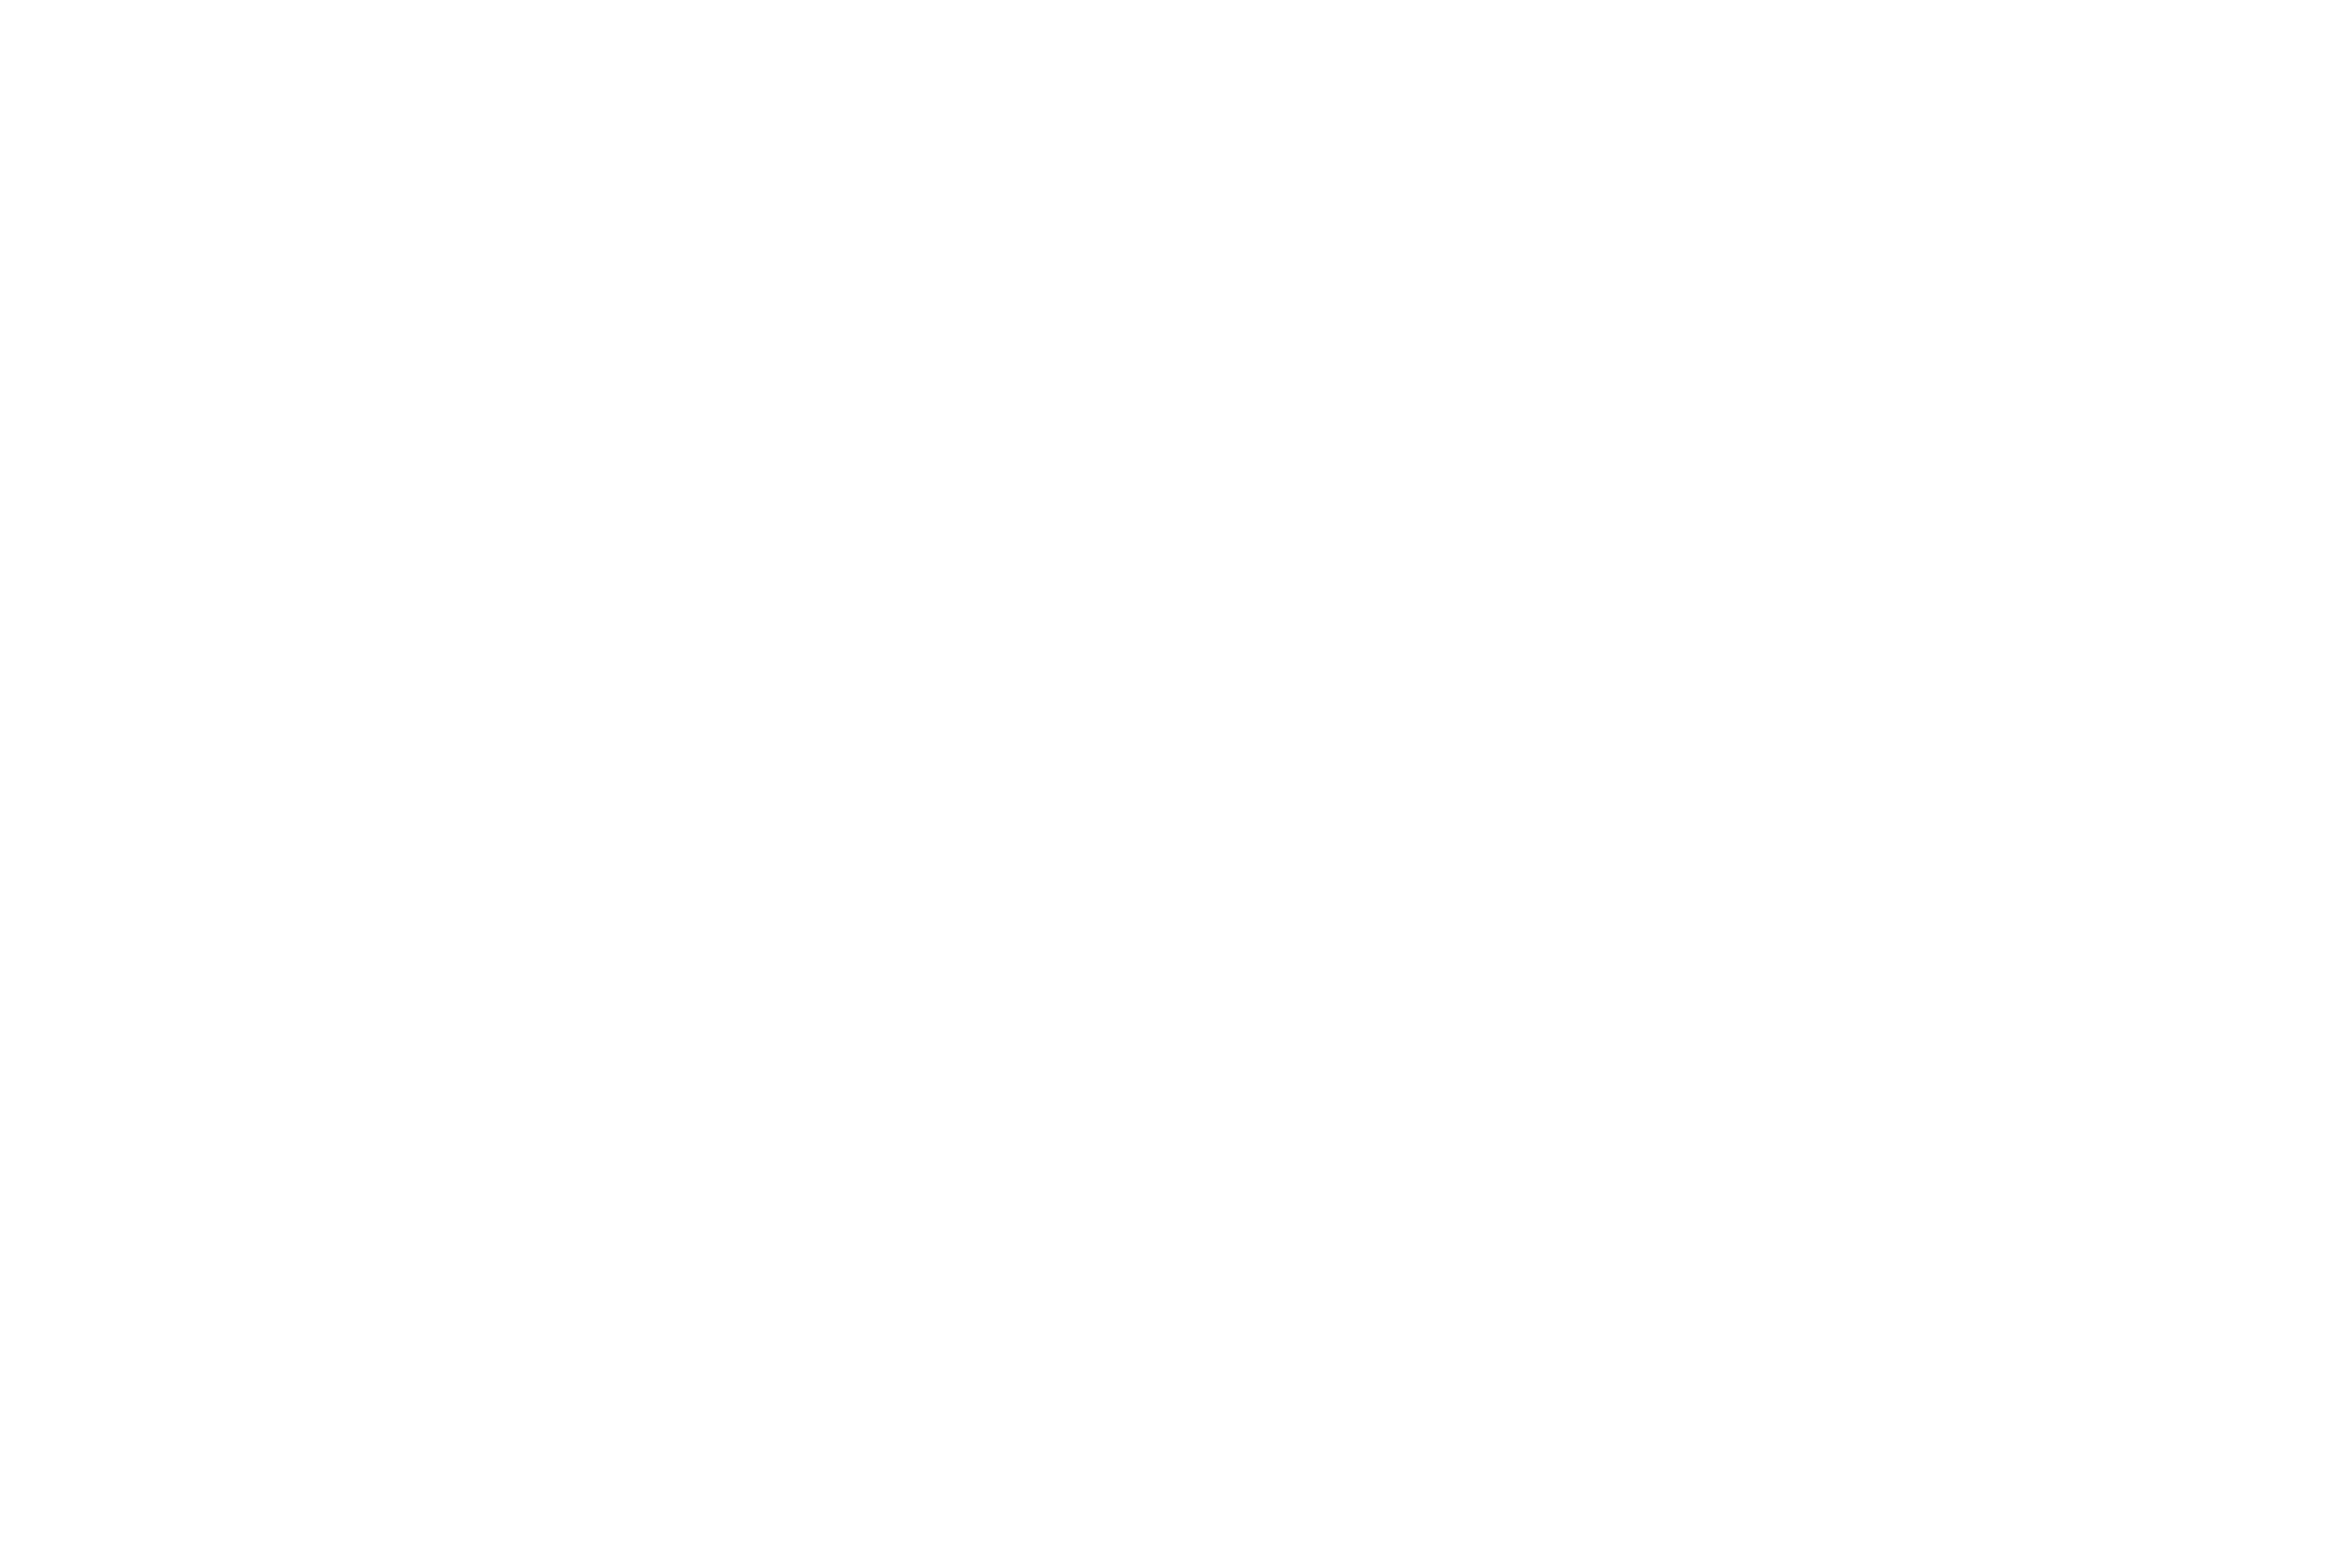 United Front Touring